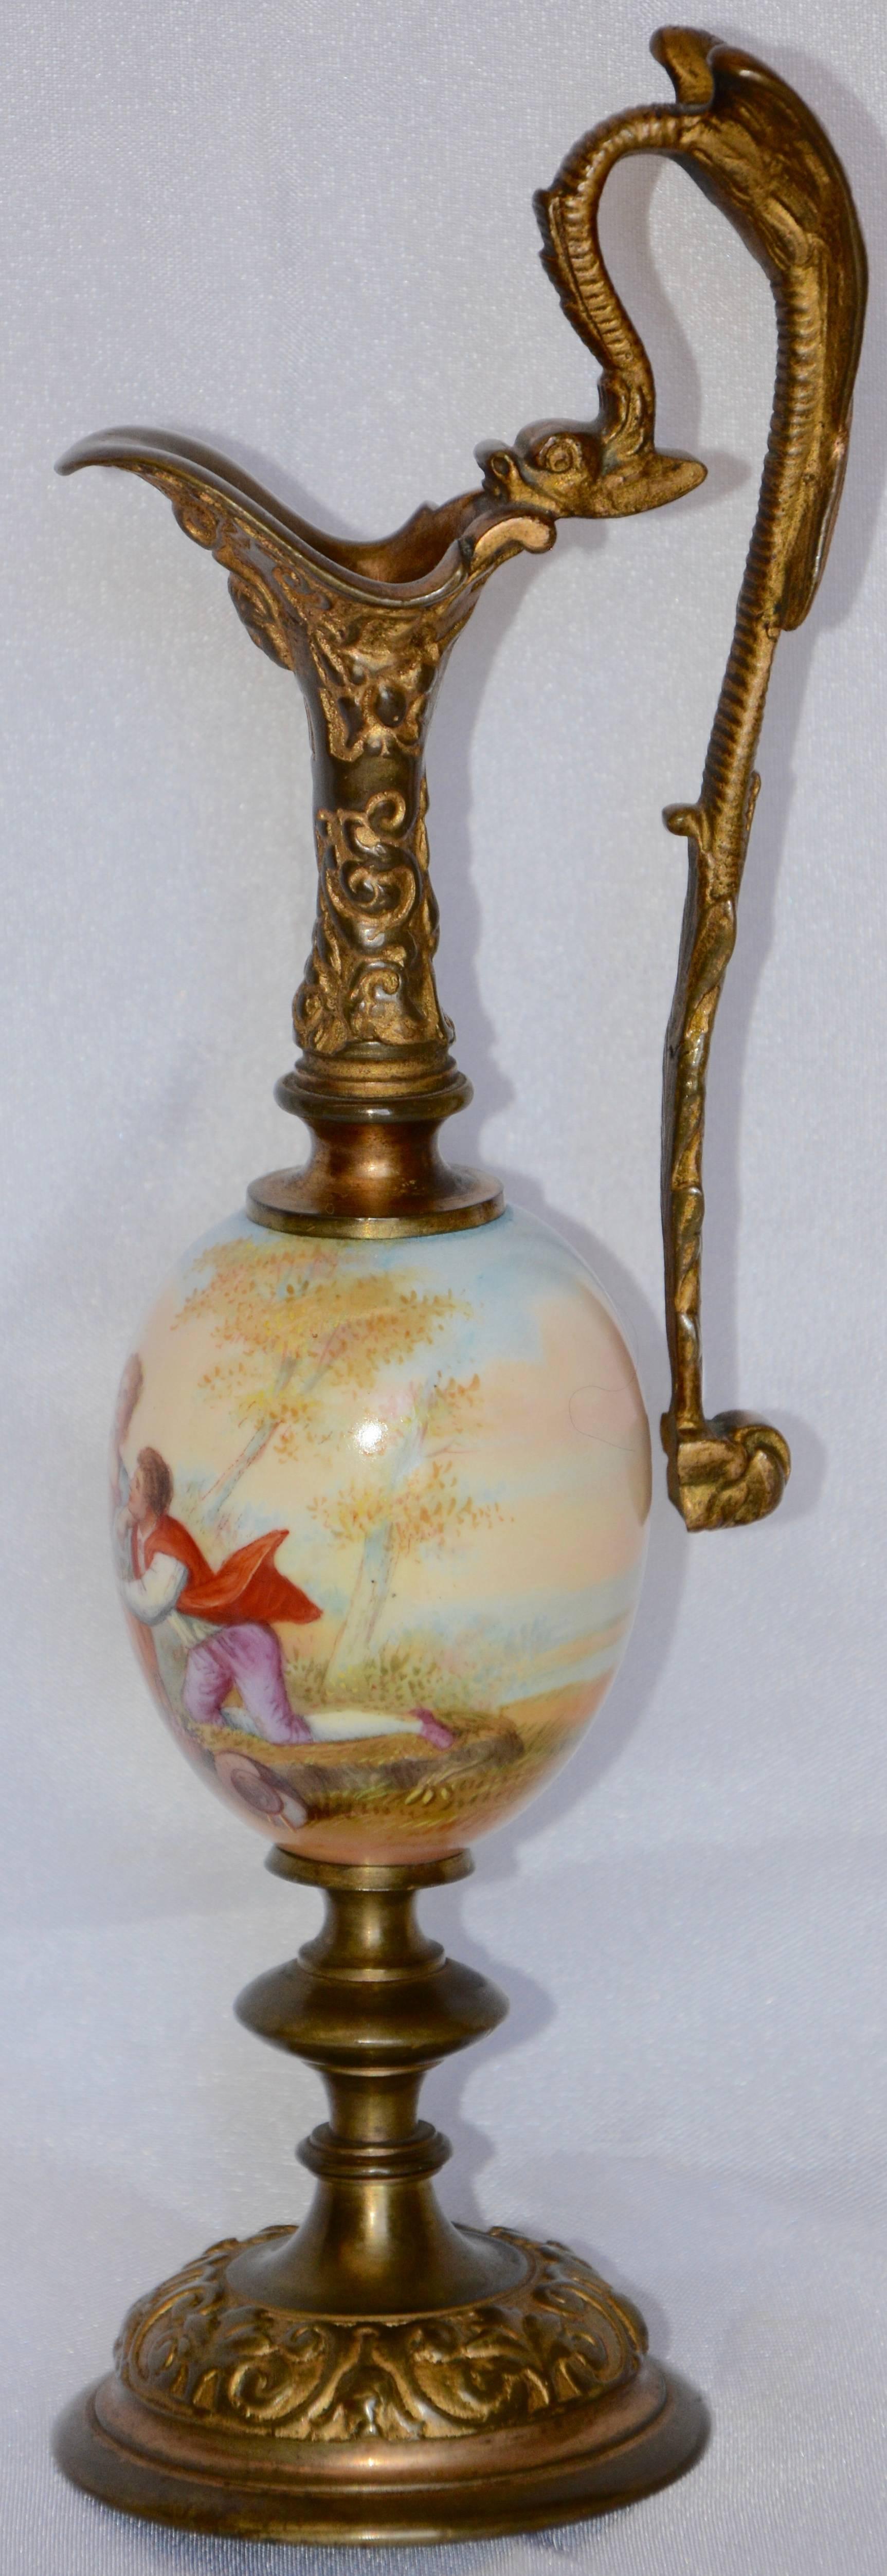 Cast Miniature Hand Painted Porcelain French Ewer, 20th Century For Sale